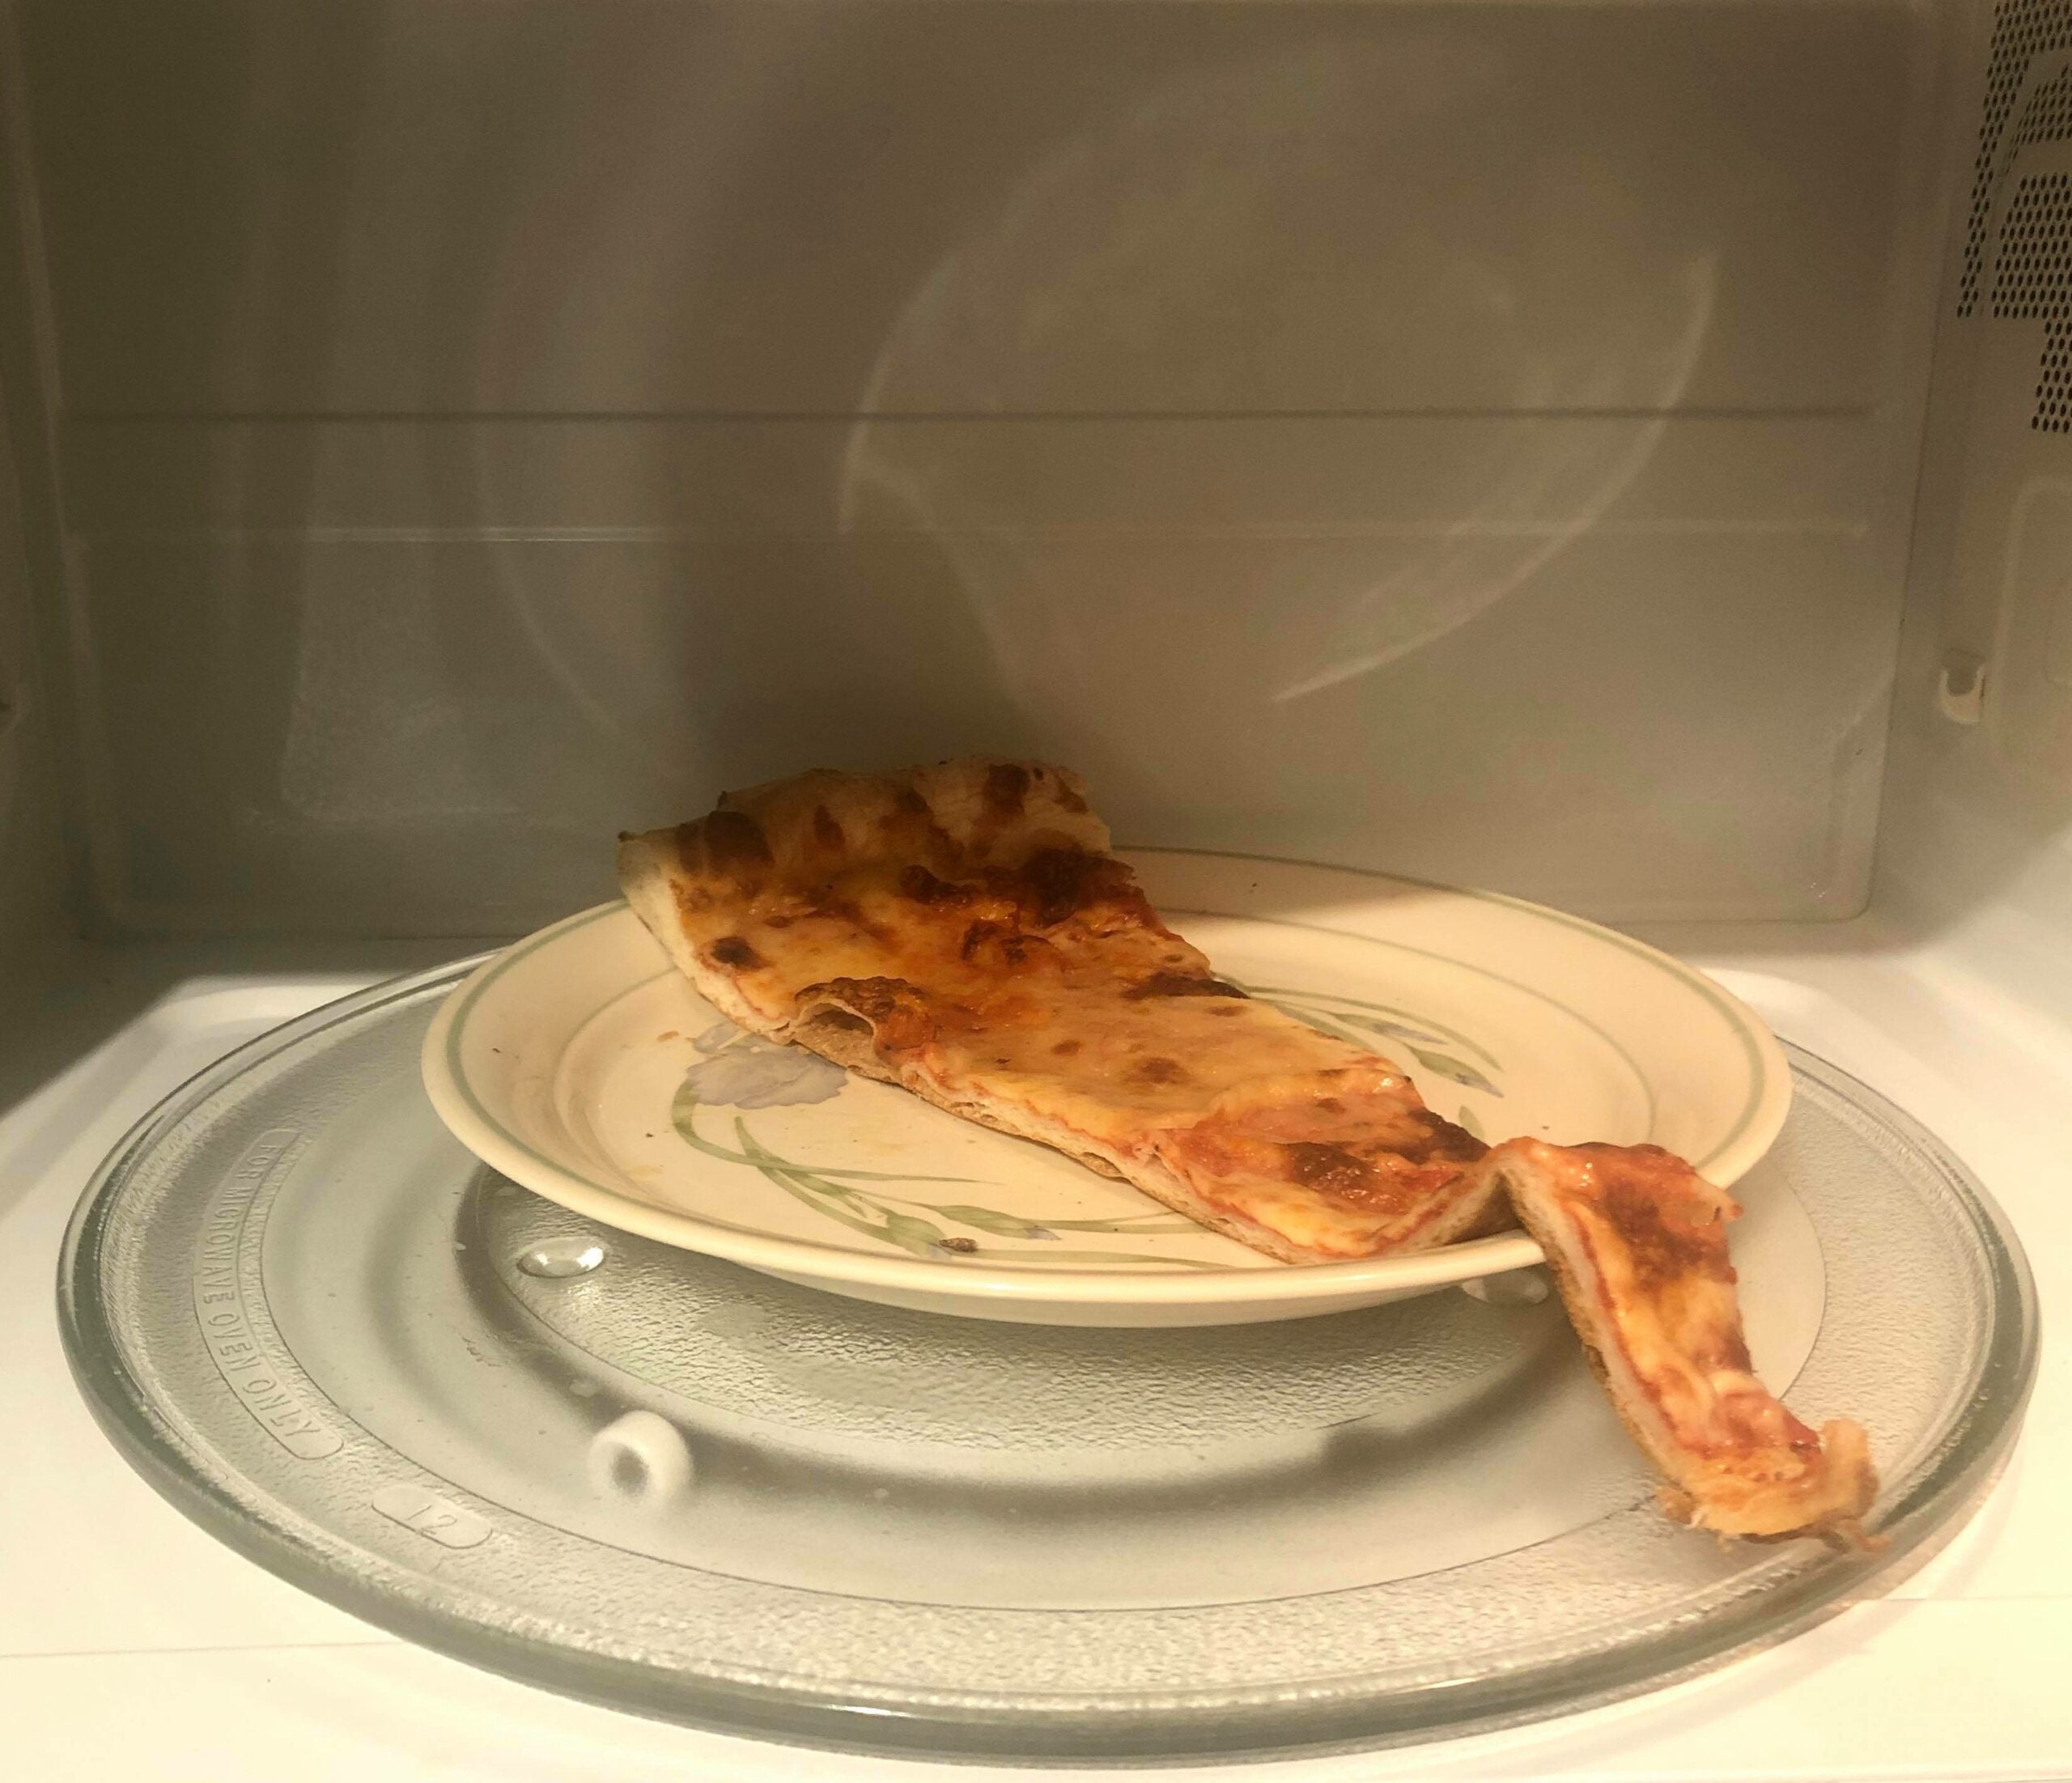 A slice of cheese pizza in the microwave before going to the oven. It's not the best way to heat up pizza, but it's adequate.